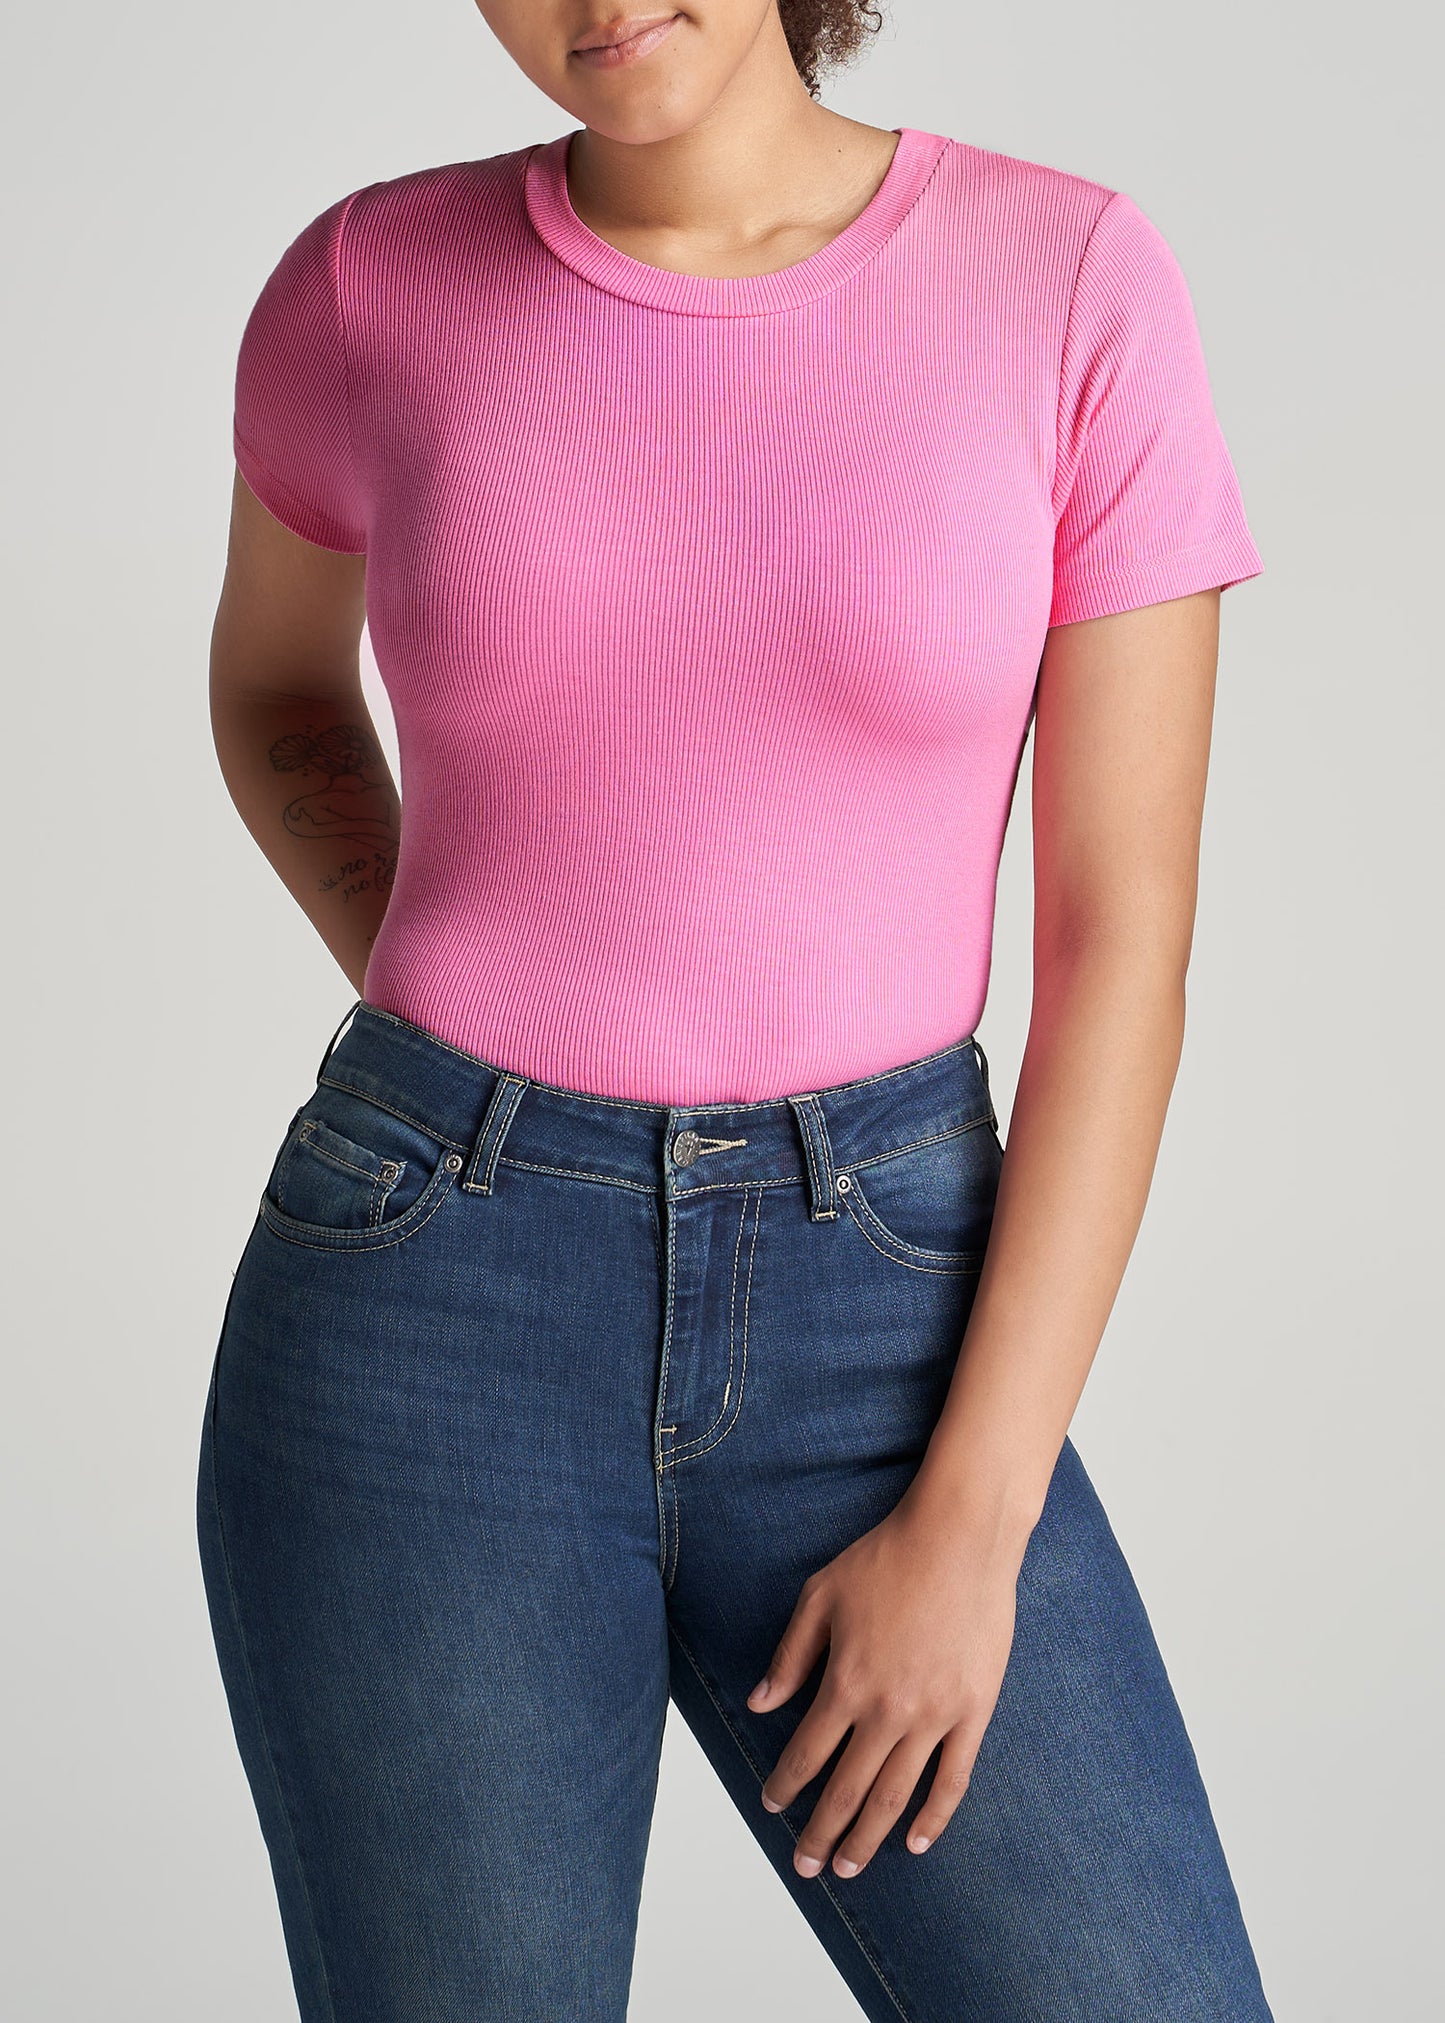 American-Tall-Women-Ribbed-Tee-BubblegumPink-front